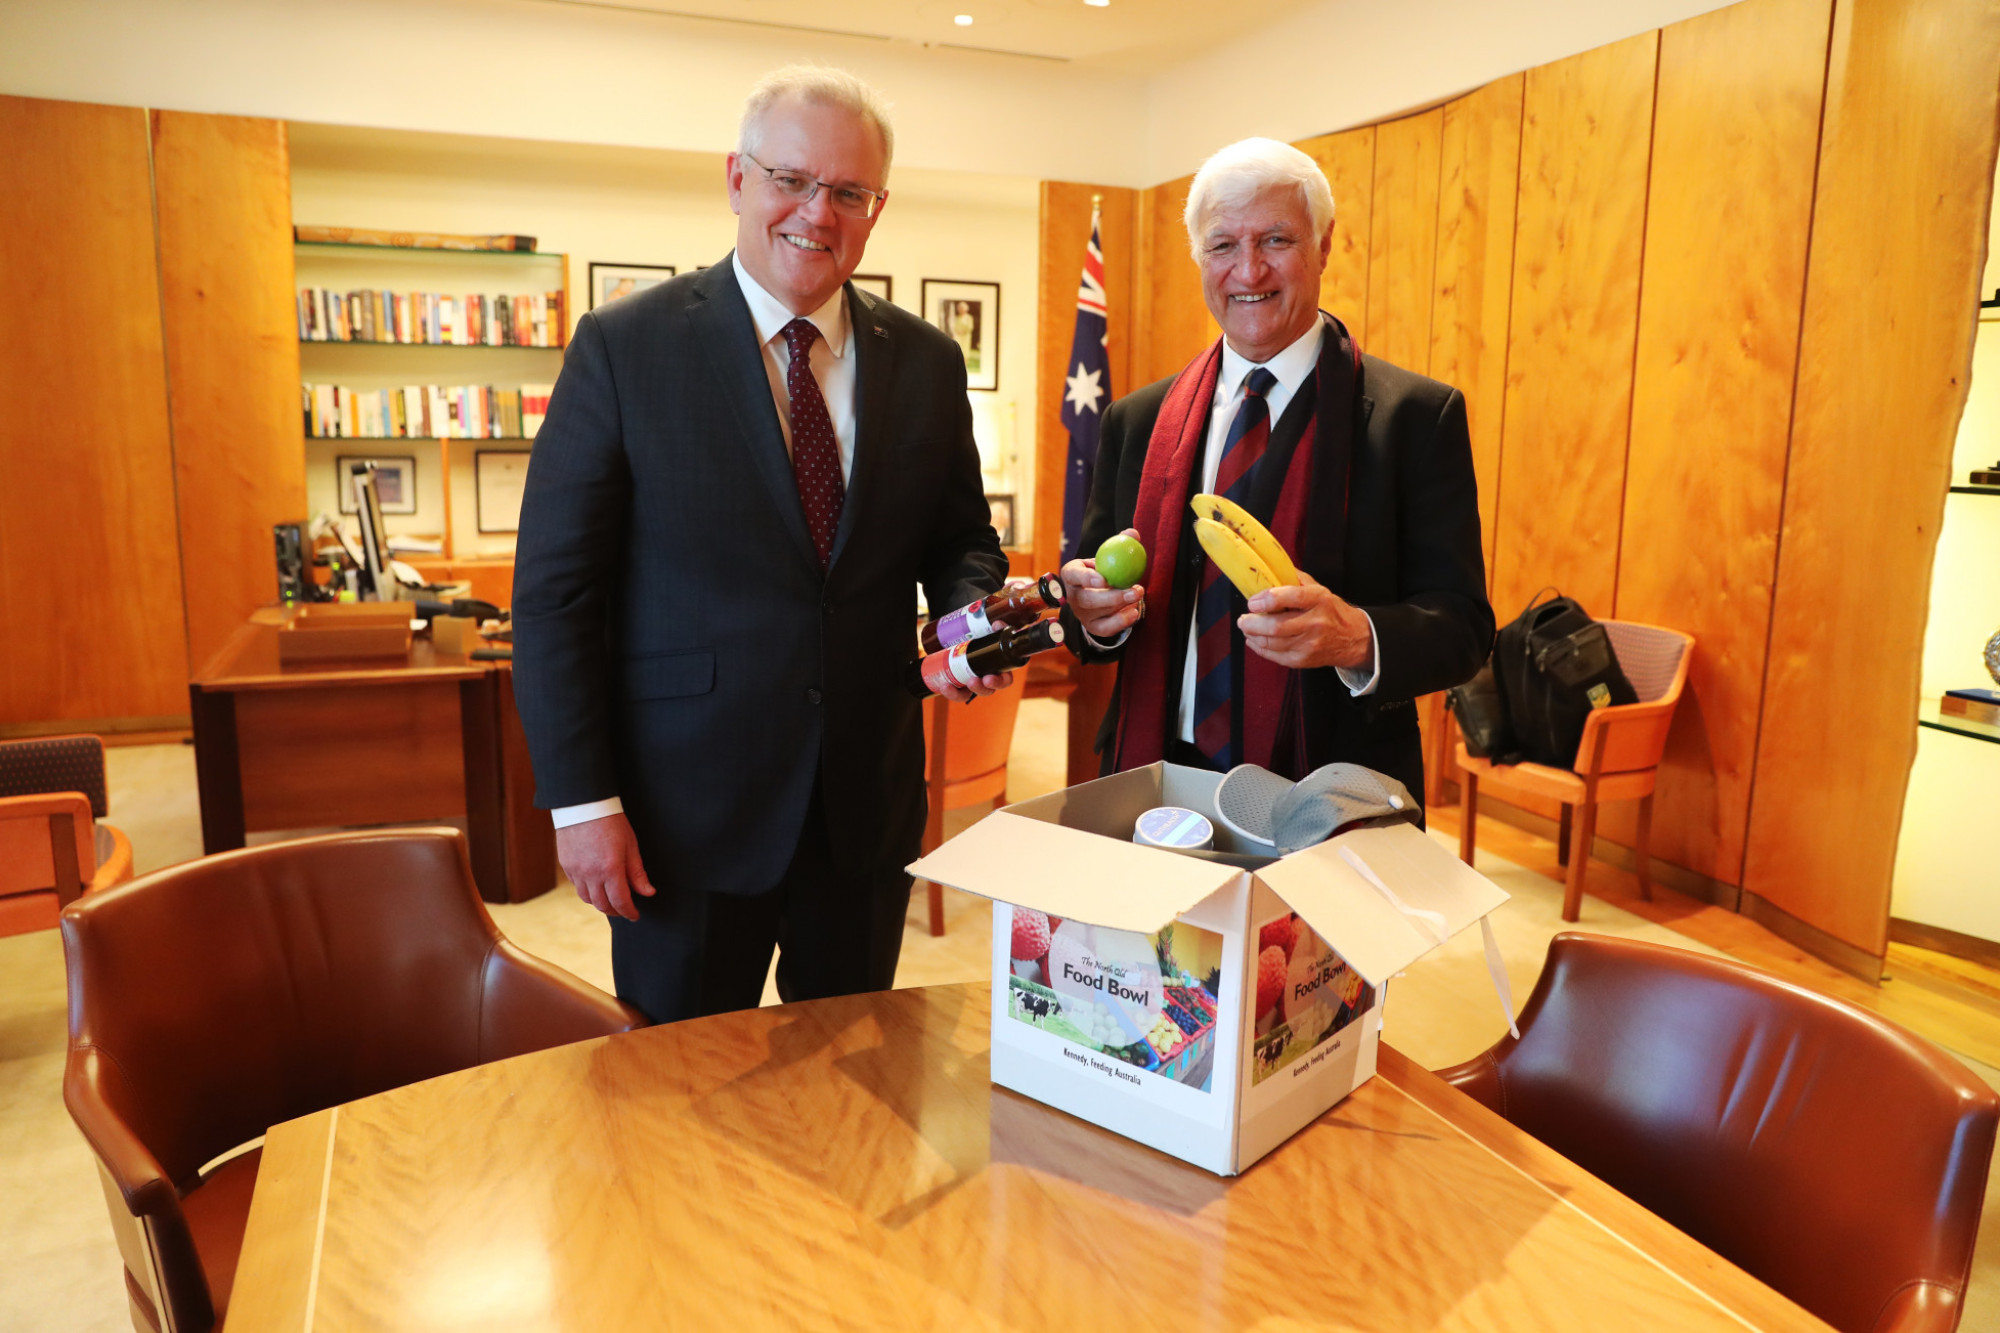 Member for Kennedy Bob Katter with Prime Minister Scott Morrison opening up a food bowl.